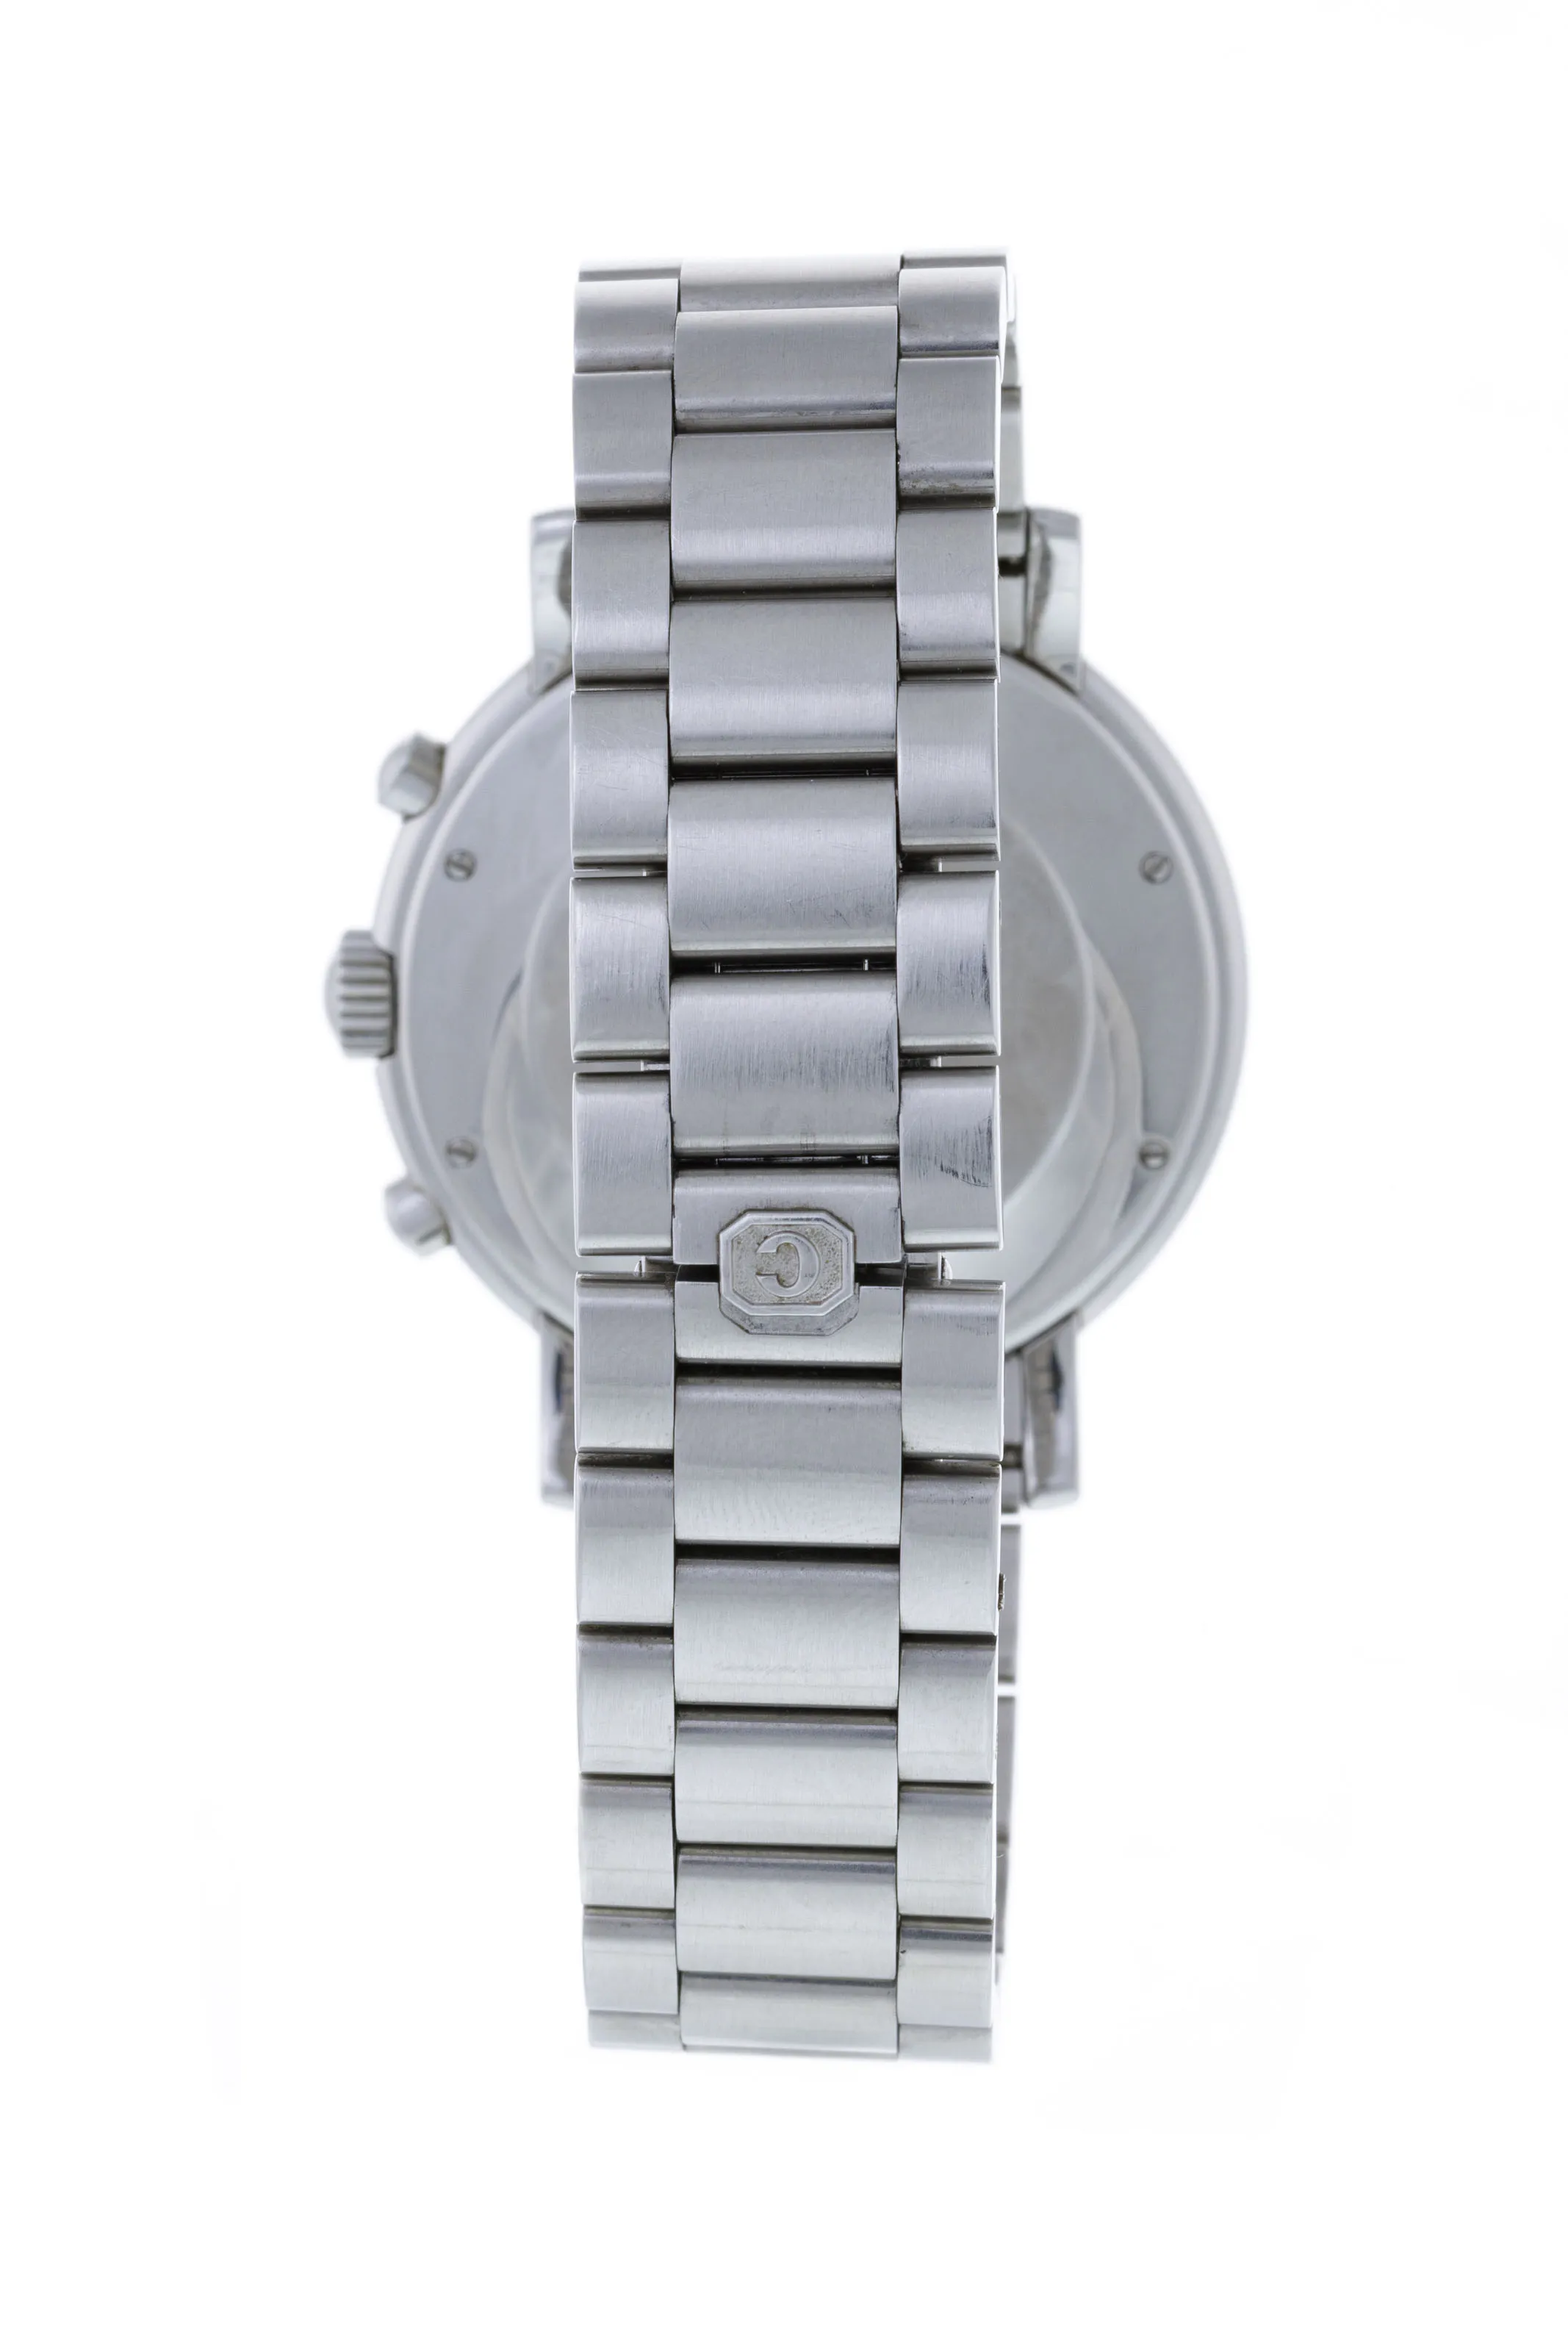 Chopard Mille Miglia 8271 38mm Stainless steel White 2